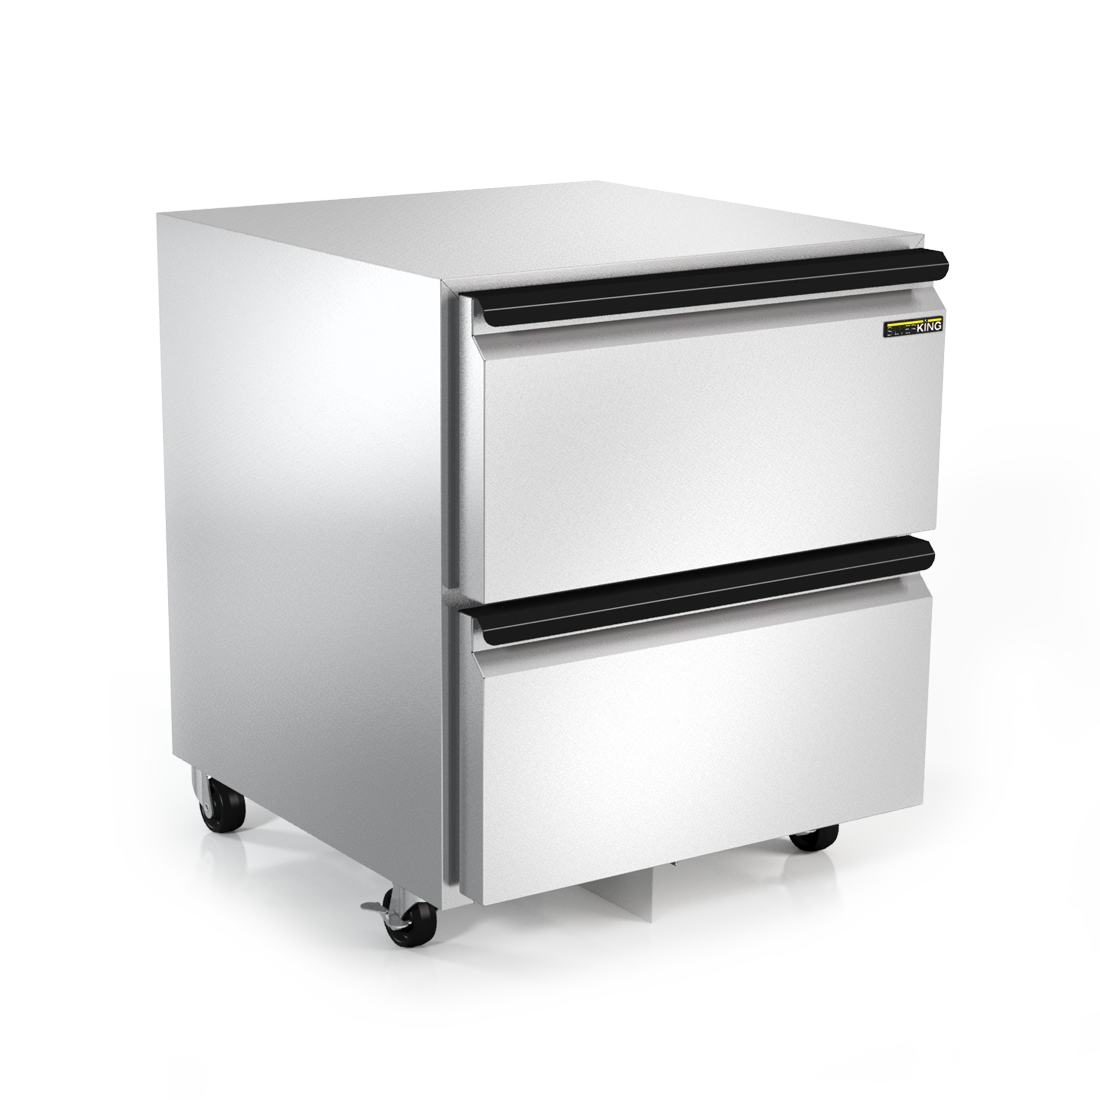 Undercounter Refrigerator 27, 115v/60hz/1ph, 2 drawer, 3 heavy-duty soft  casters (two locking), product trays and adapters, NEMA 5-15P - Silverking